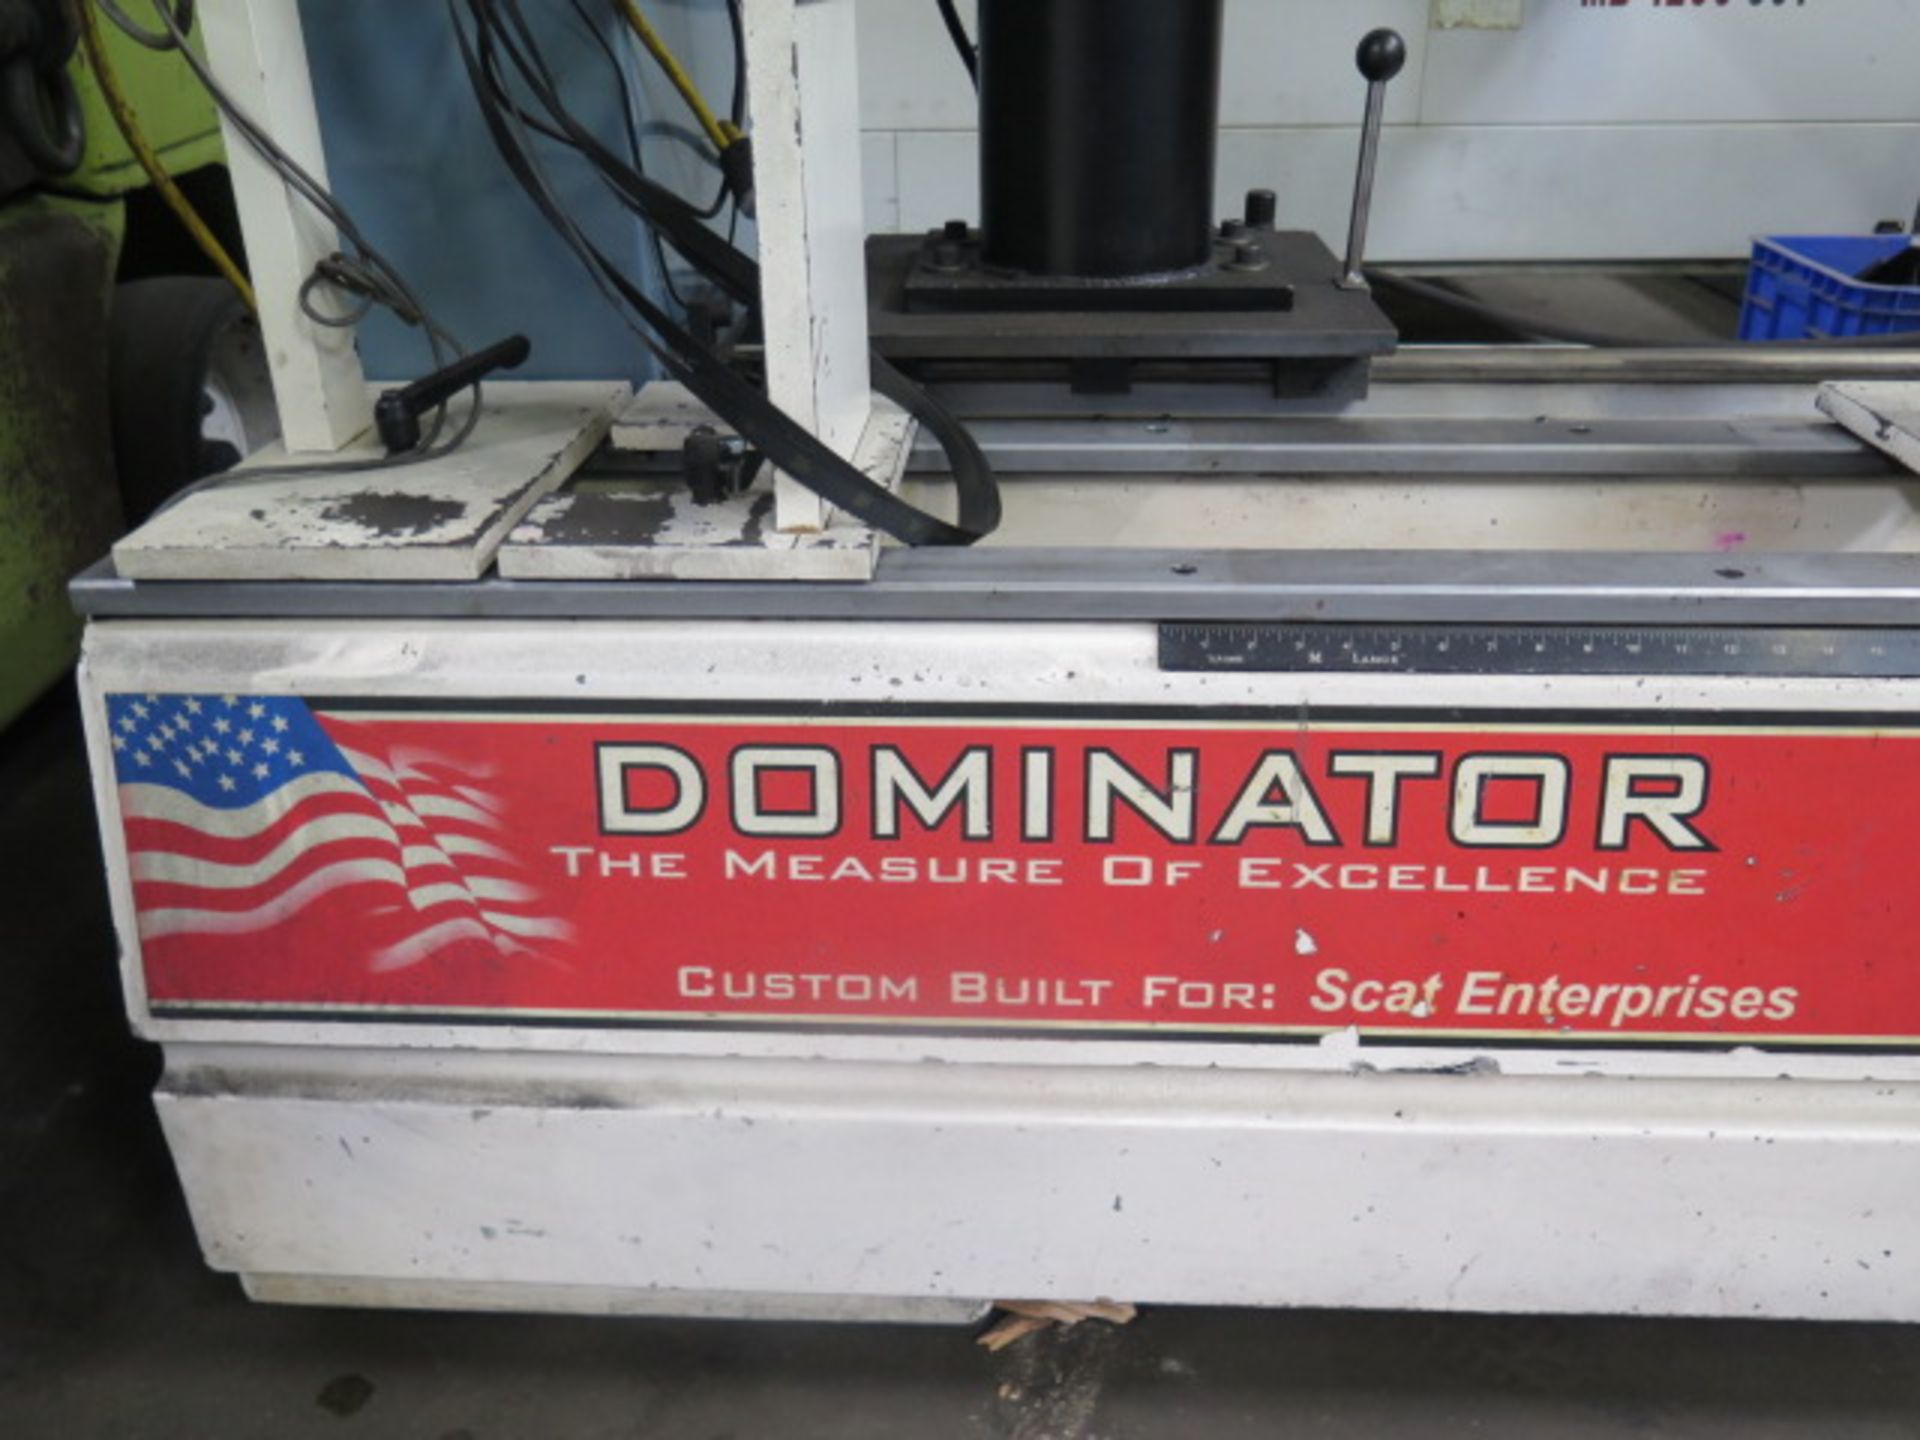 Hines "Dominator" Crank Shaft Balance Drilling Machine w/ Jet Drilling Head SOLD AS-IS - Image 11 of 12